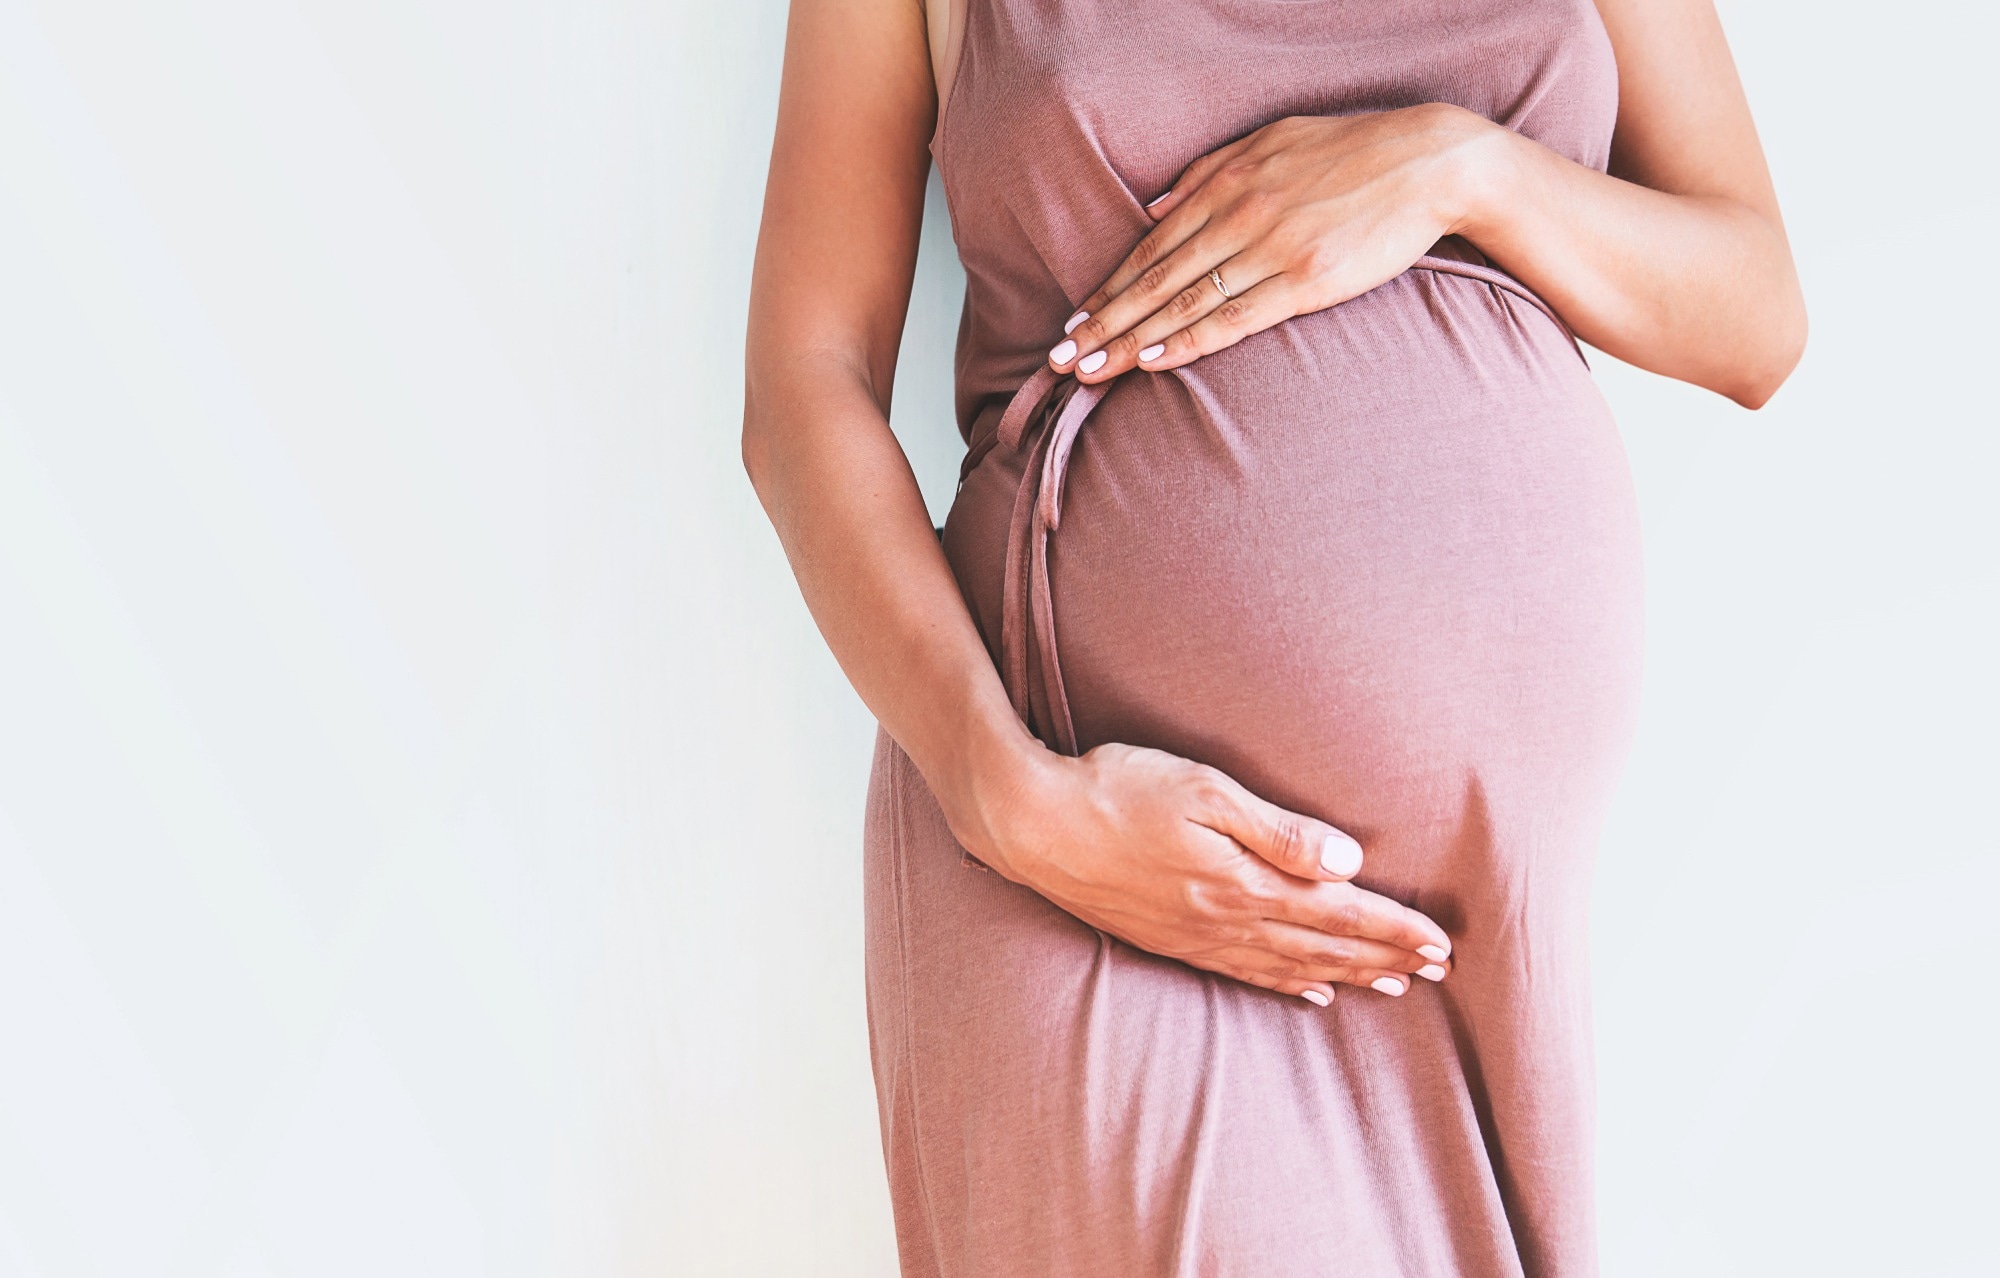 Study: The effect of COVID-19 vaccination and booster on maternal-fetal outcomes: a retrospective multicenter cohort study. Image Credit: Natalia Deriabina/Shutterstock